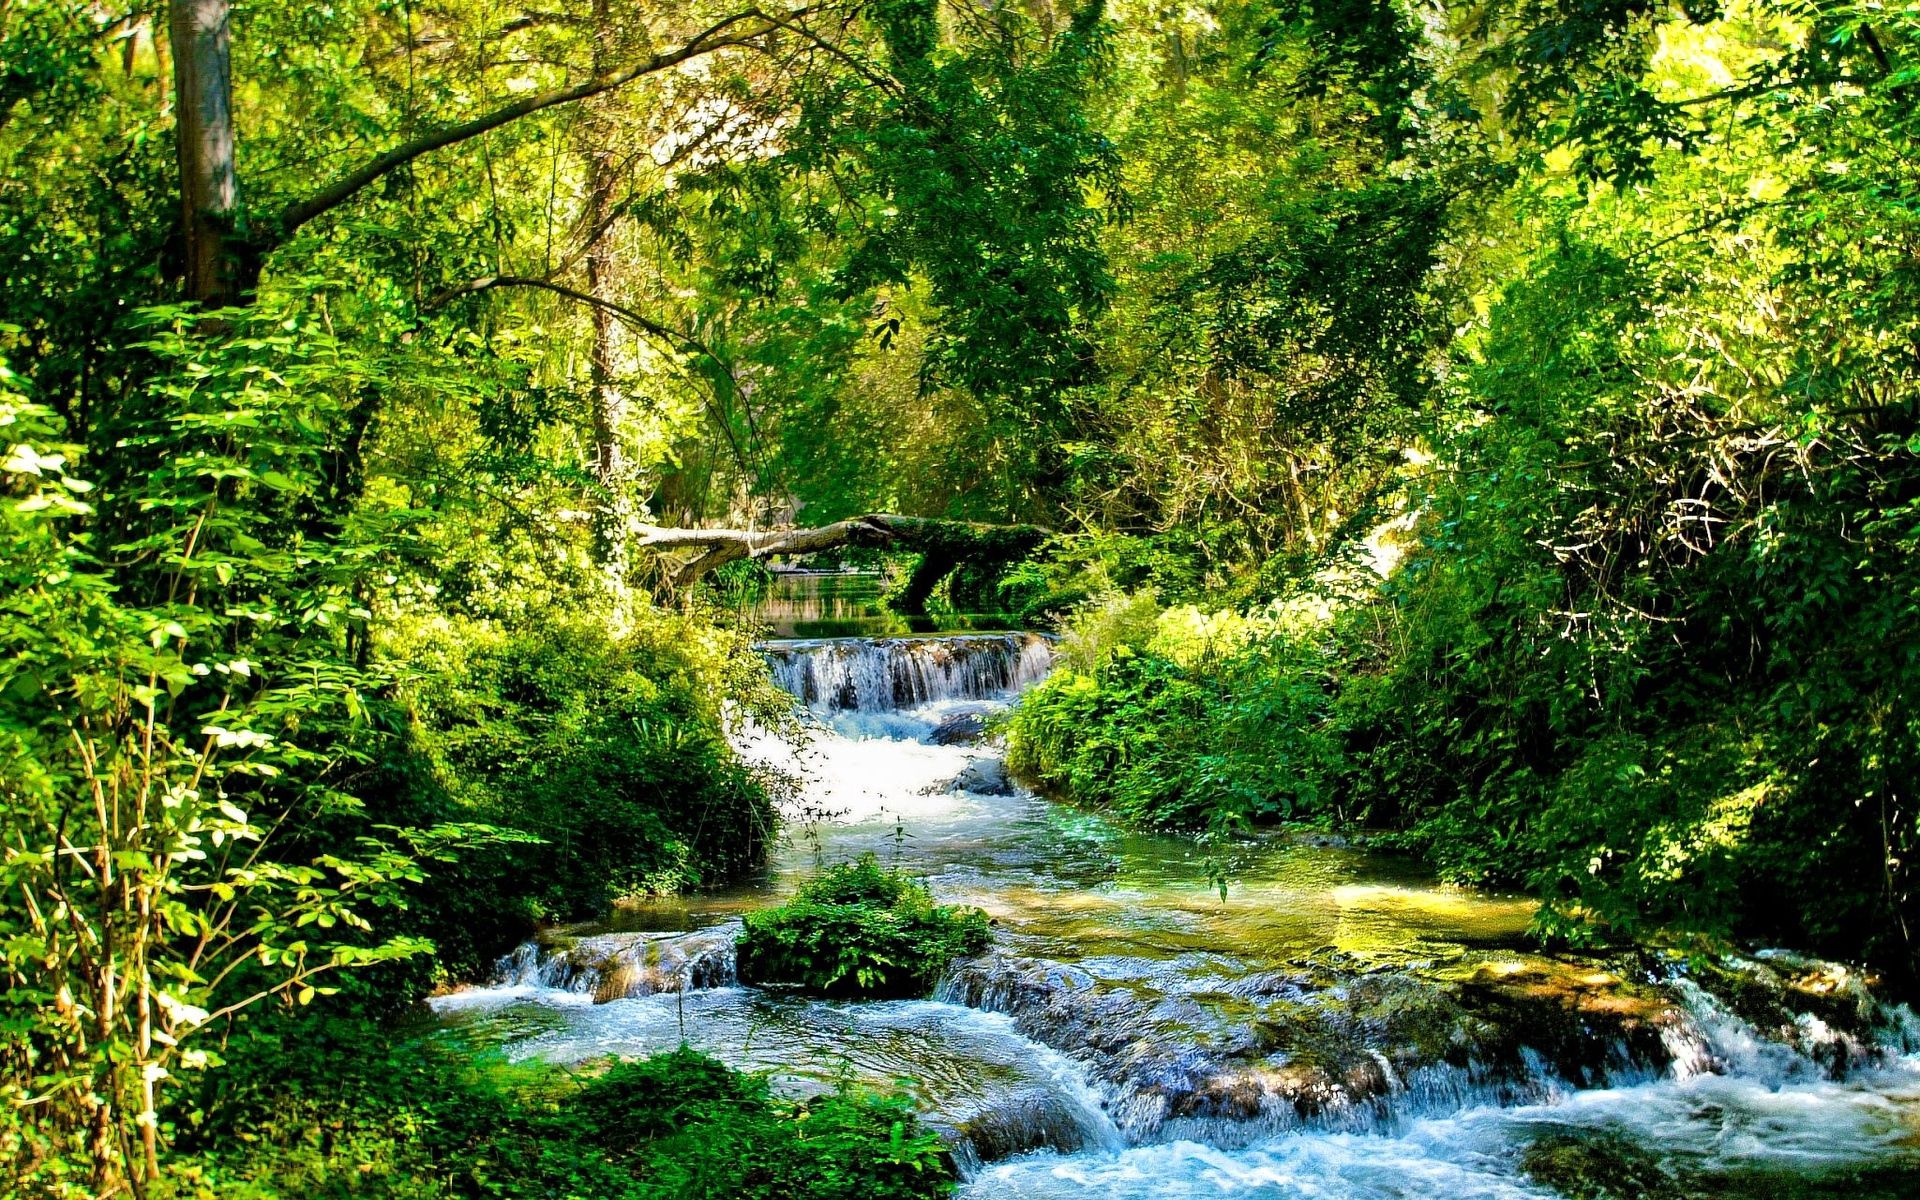 summer, contrast, green, nature, rivers, forest, cascades, flow, stream, shadows, brightly, thicket, thickets